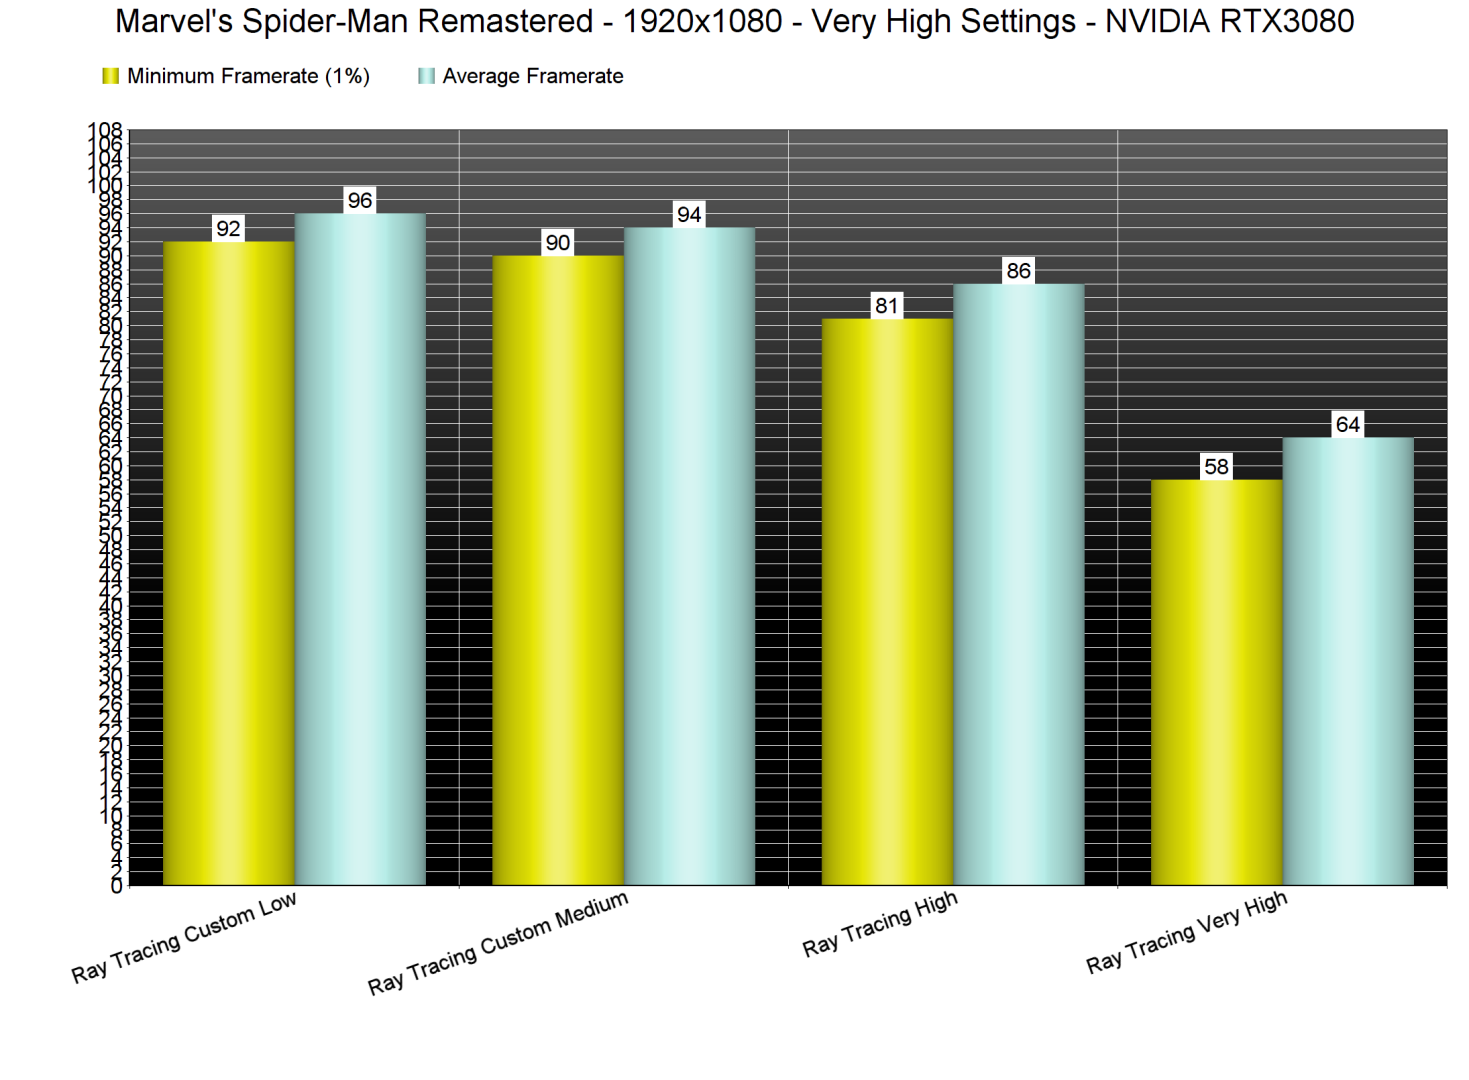 Marvel's Spider-Man Remastered Ray Tracing benchmarks-2